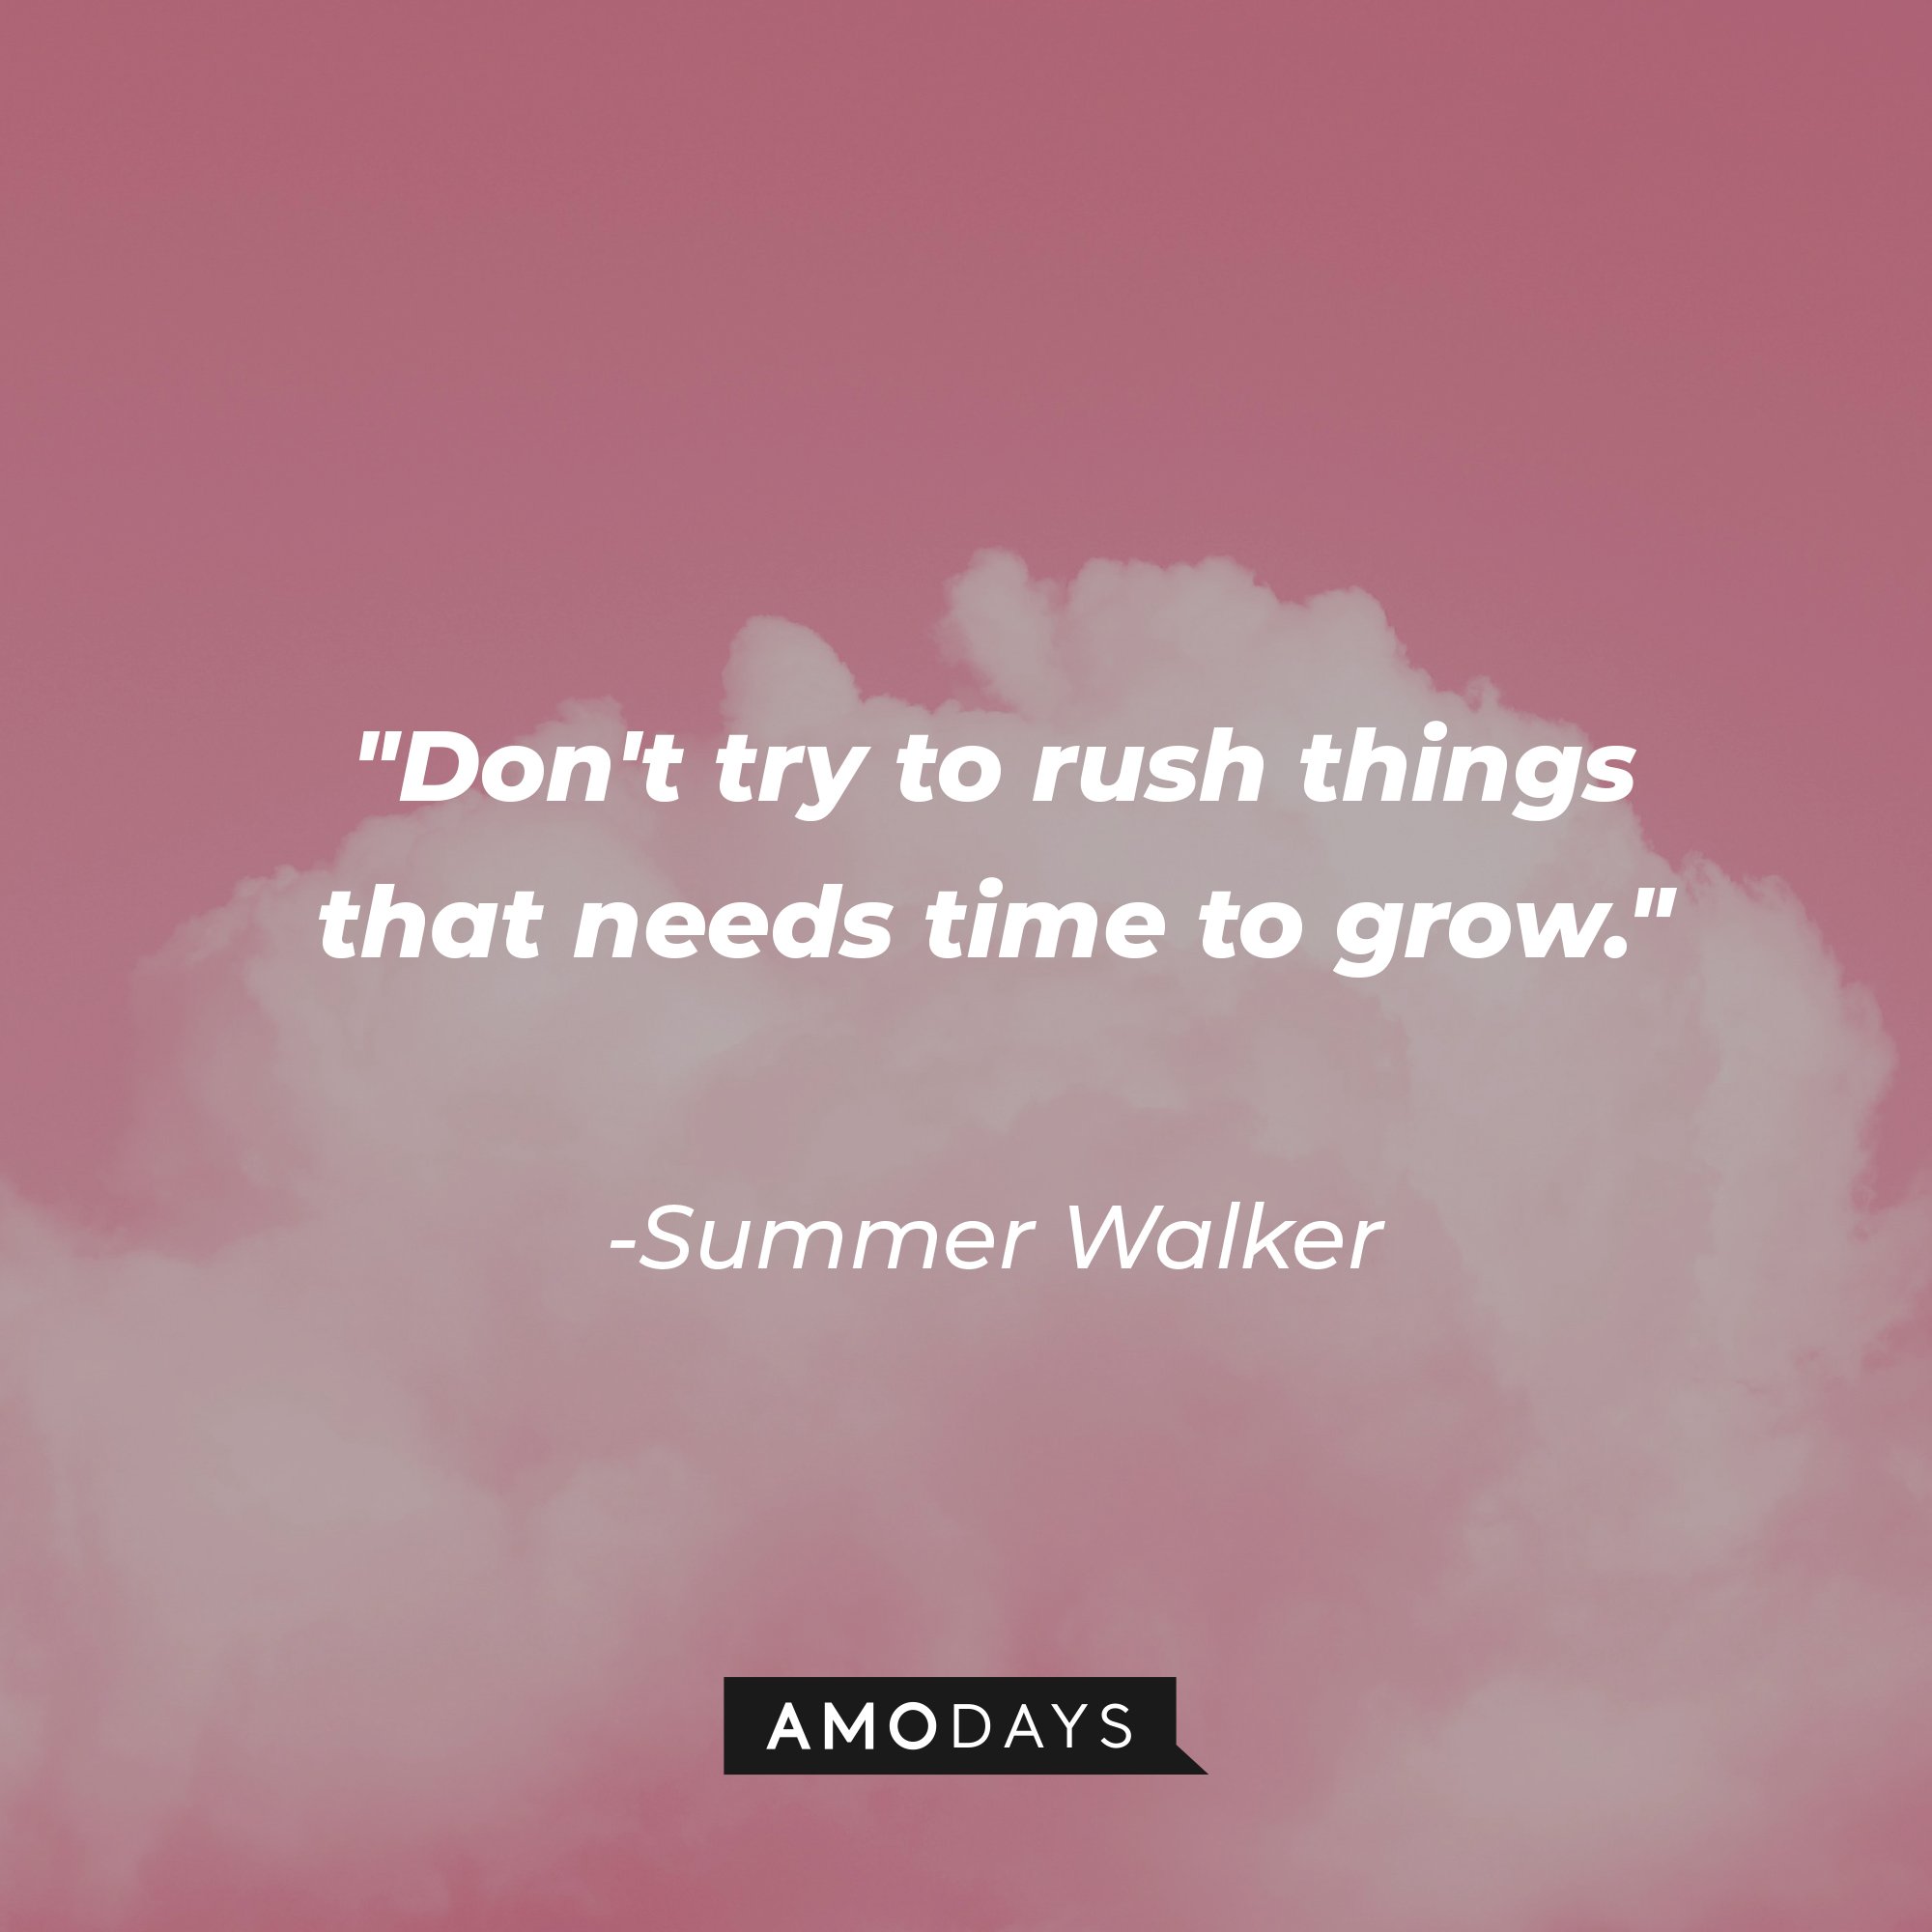 Summer Walker's quote: "Don't try to rush things that needs time to grow." | Image: AmoDays